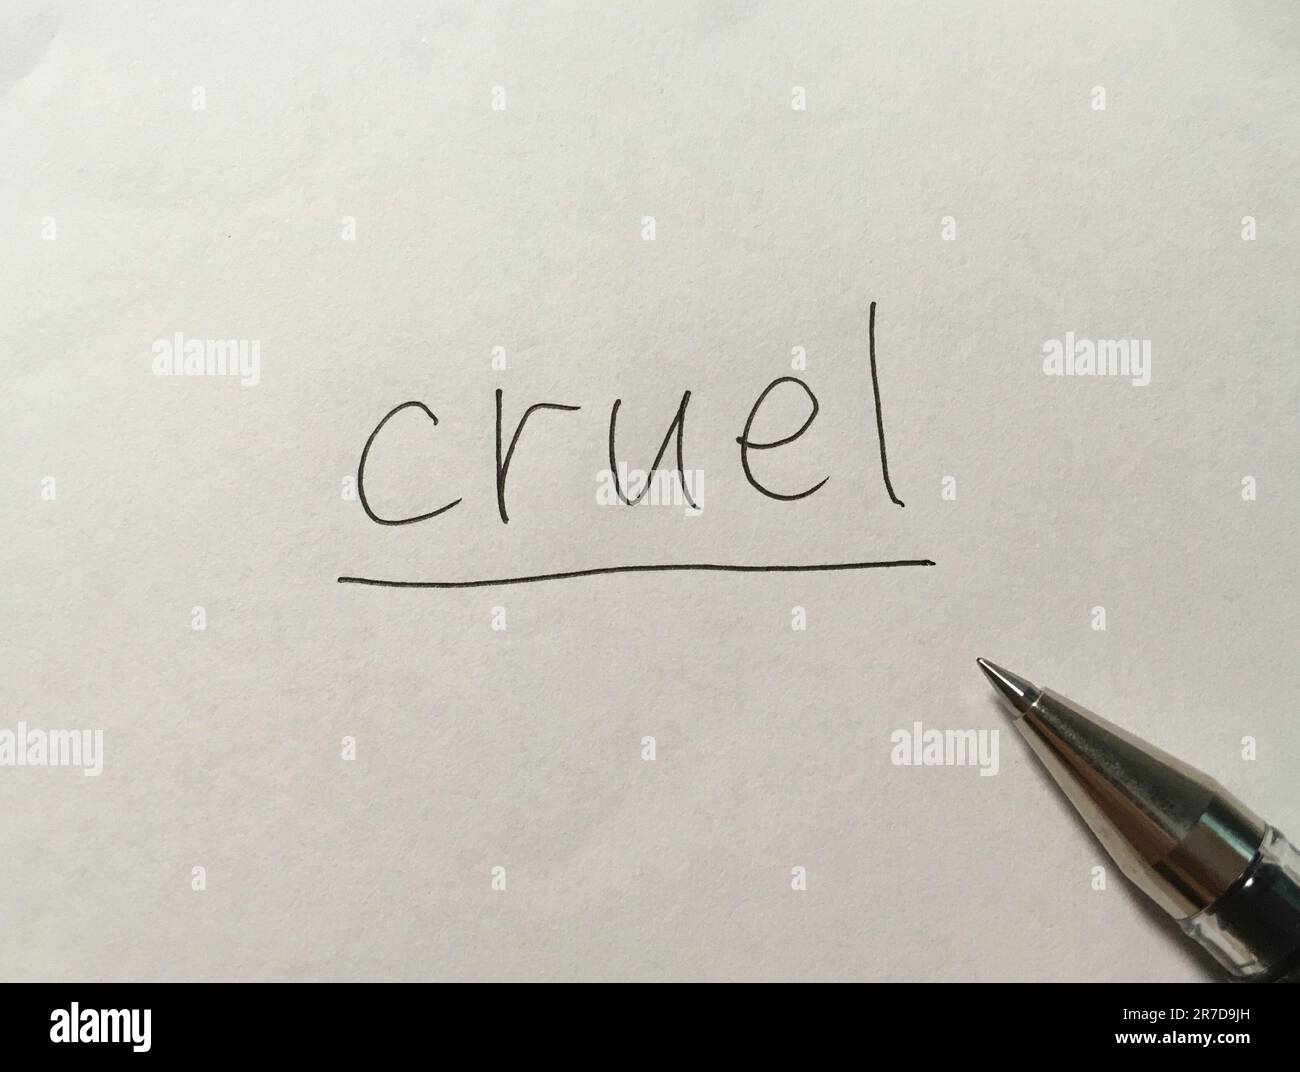 Cruel concept word on paper background Stock Photo